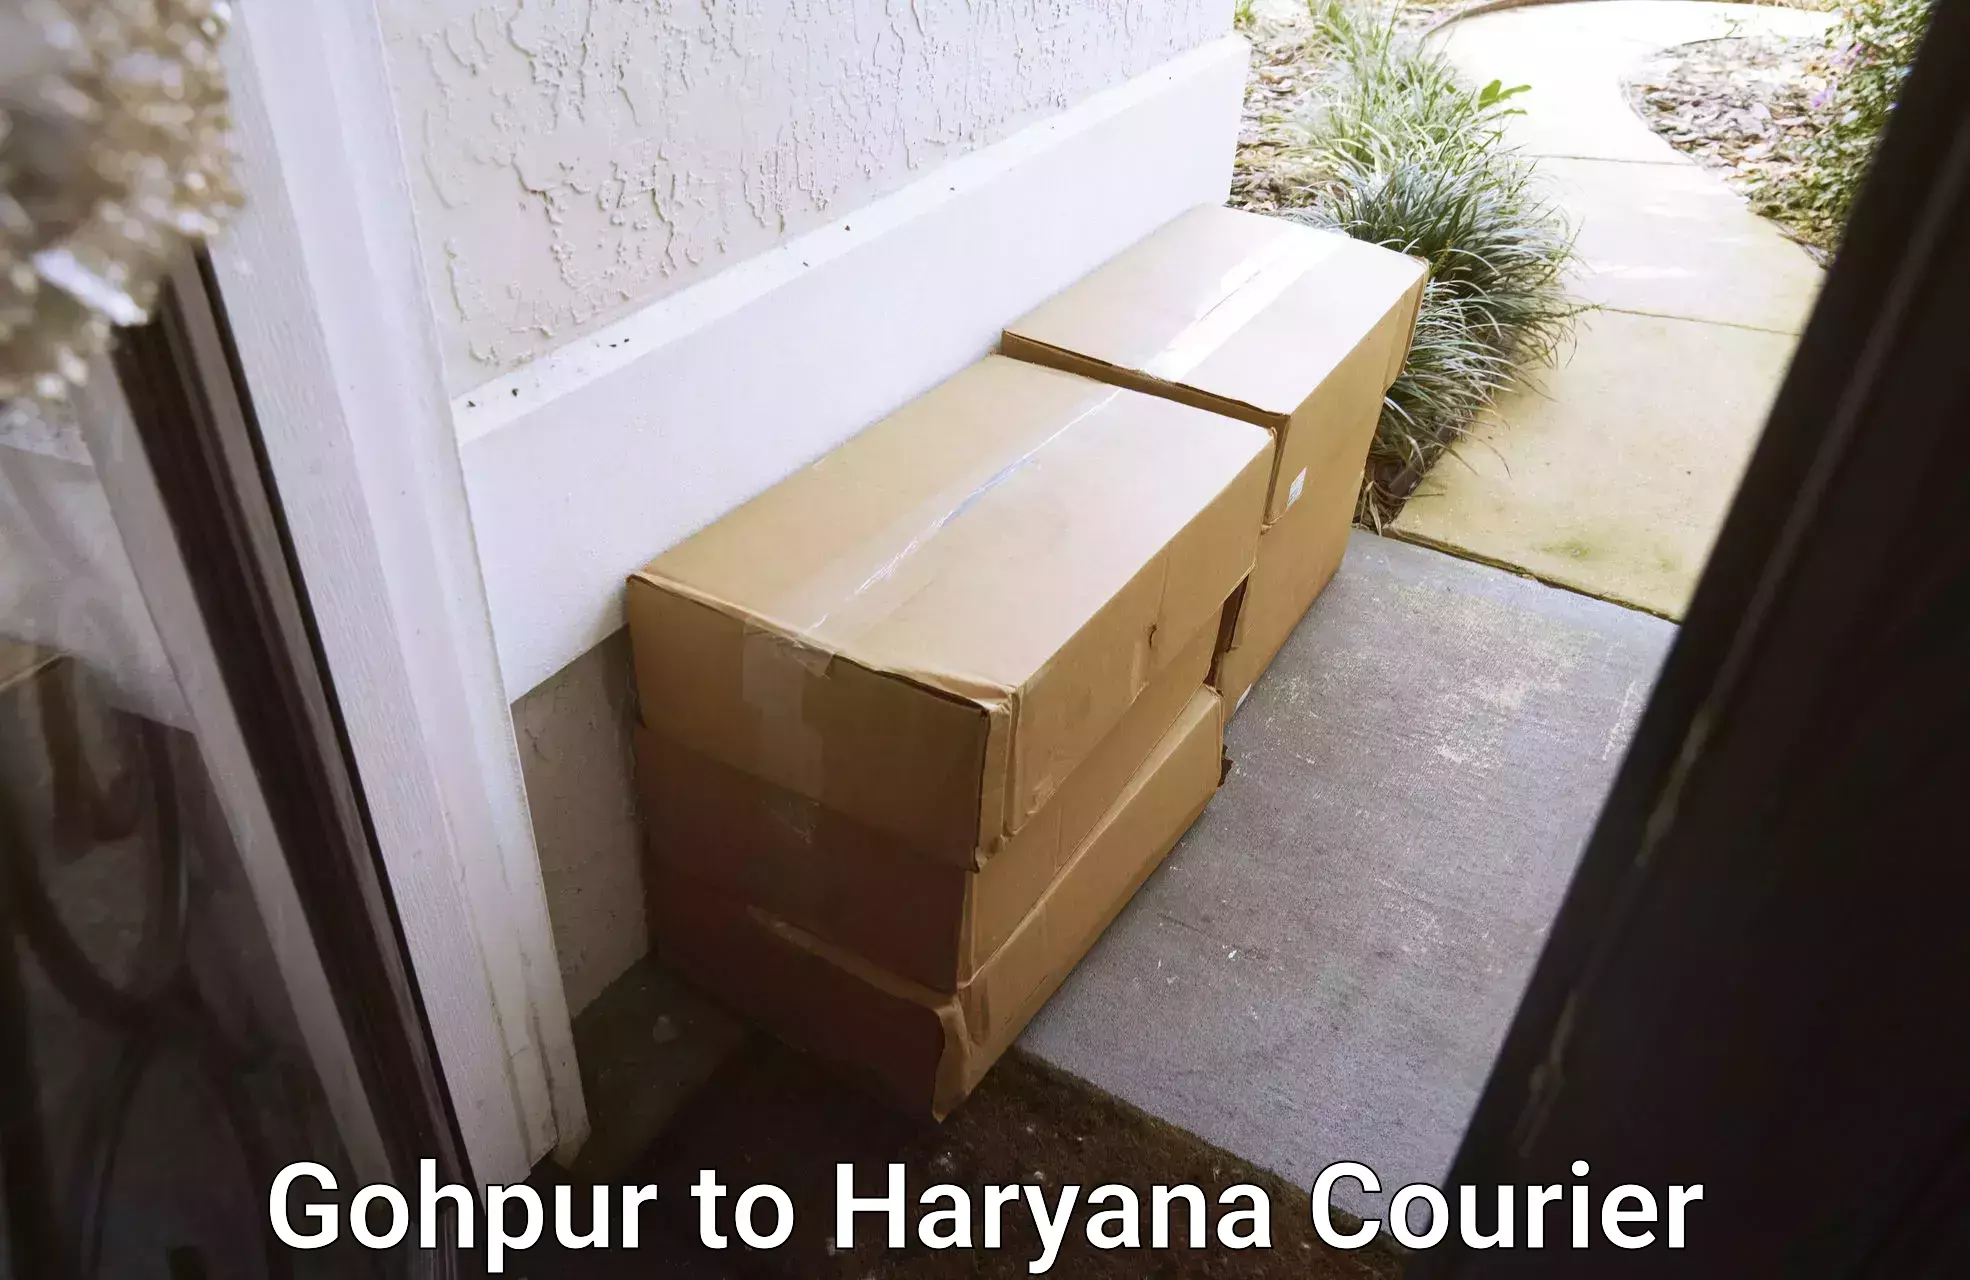 International courier rates in Gohpur to Gurgaon